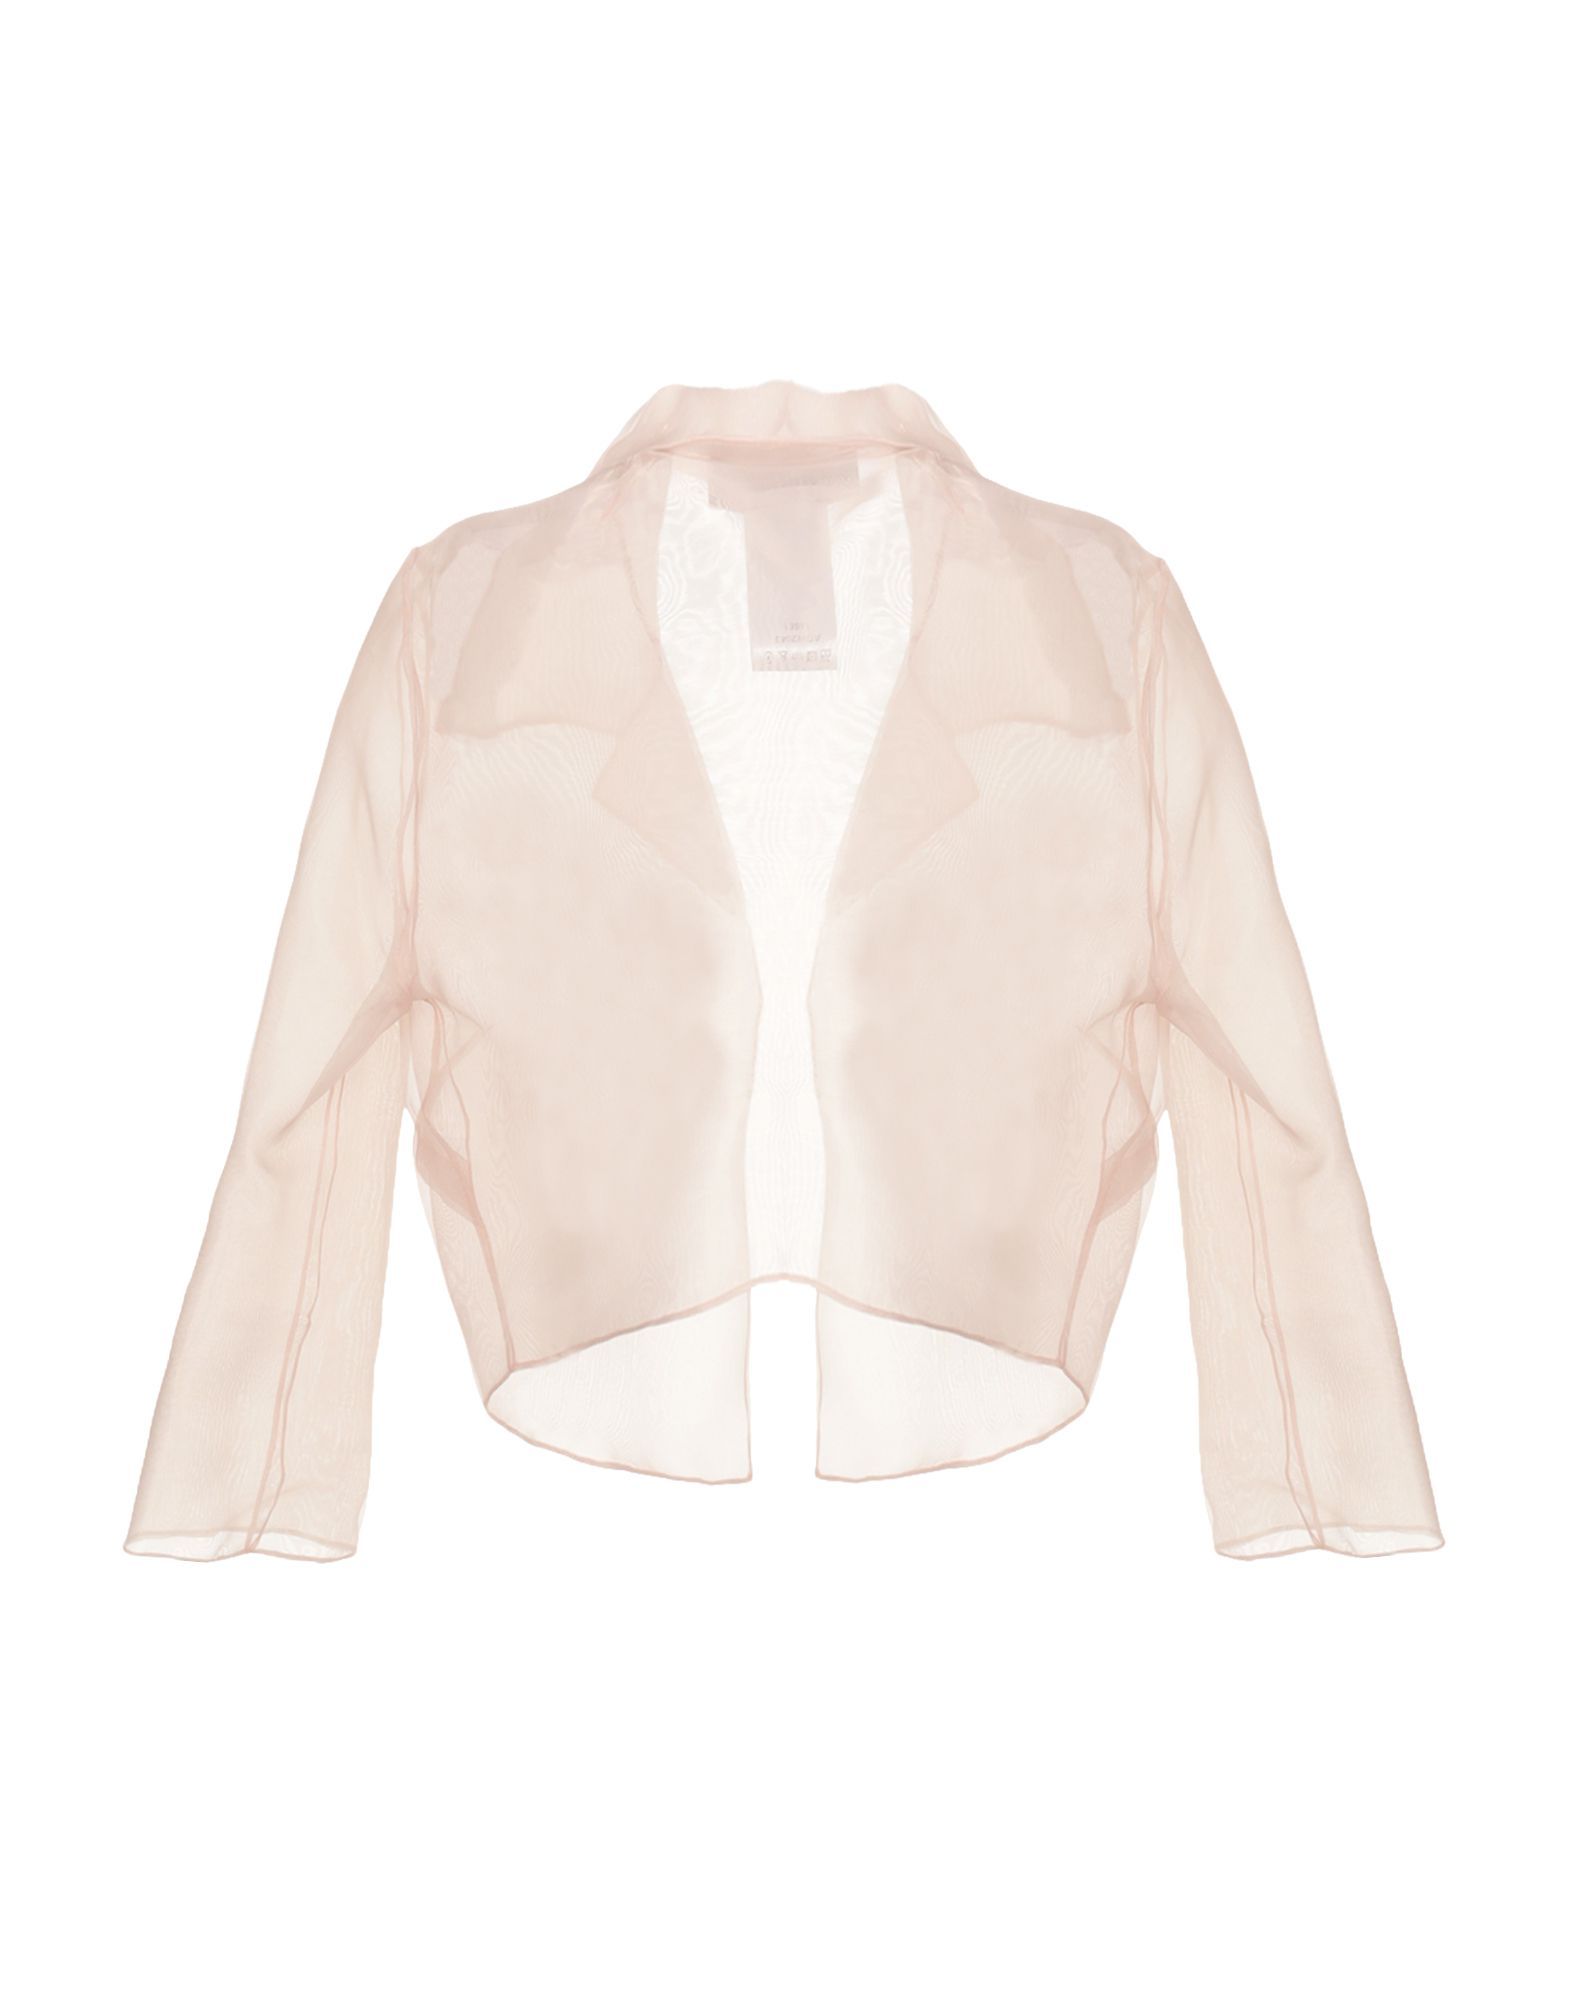 organza, no appliqués, basic solid colour, no pockets, deep neckline, single-breasted , 3/4 length sleeves, unlined, single-breasted jacket